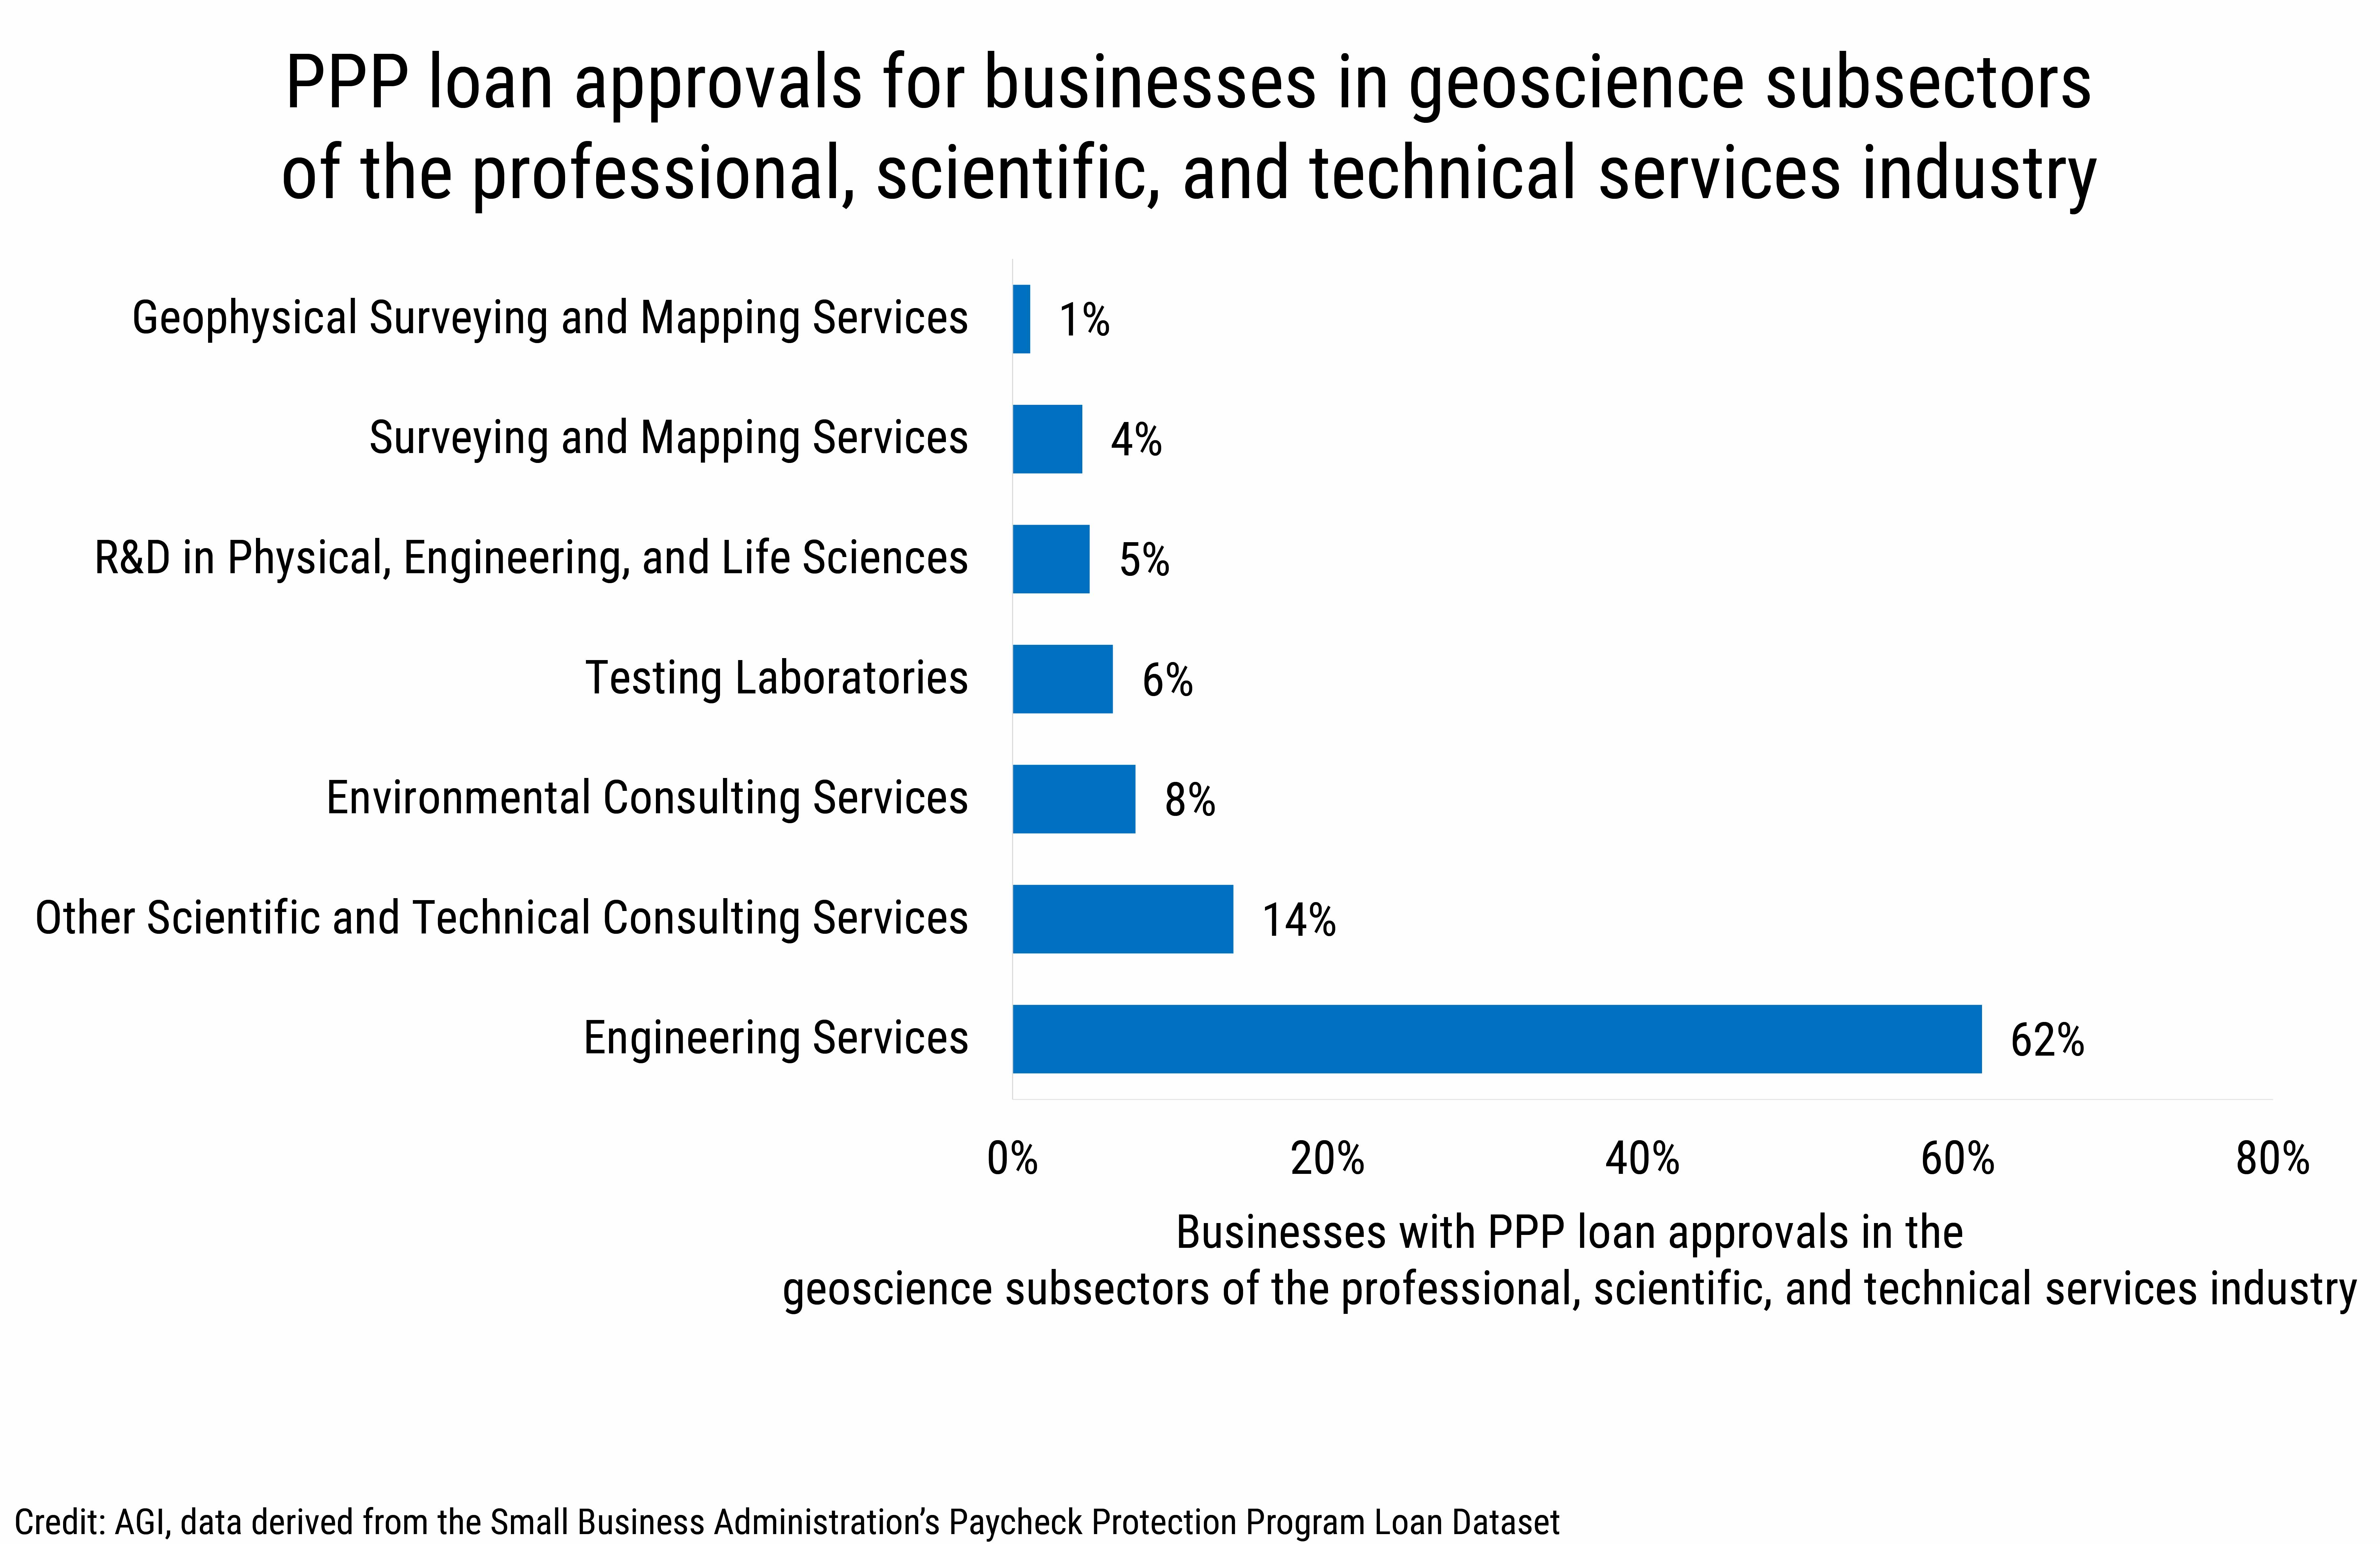 DB_2020-016 chart 02: PPP loan approvals for businesses in geoscience subsectors of the professional, scientific, and technical services industry. (credit: AGI, data derived from the SBAn&#039;s Paycheck Protection Program Loan Dataset